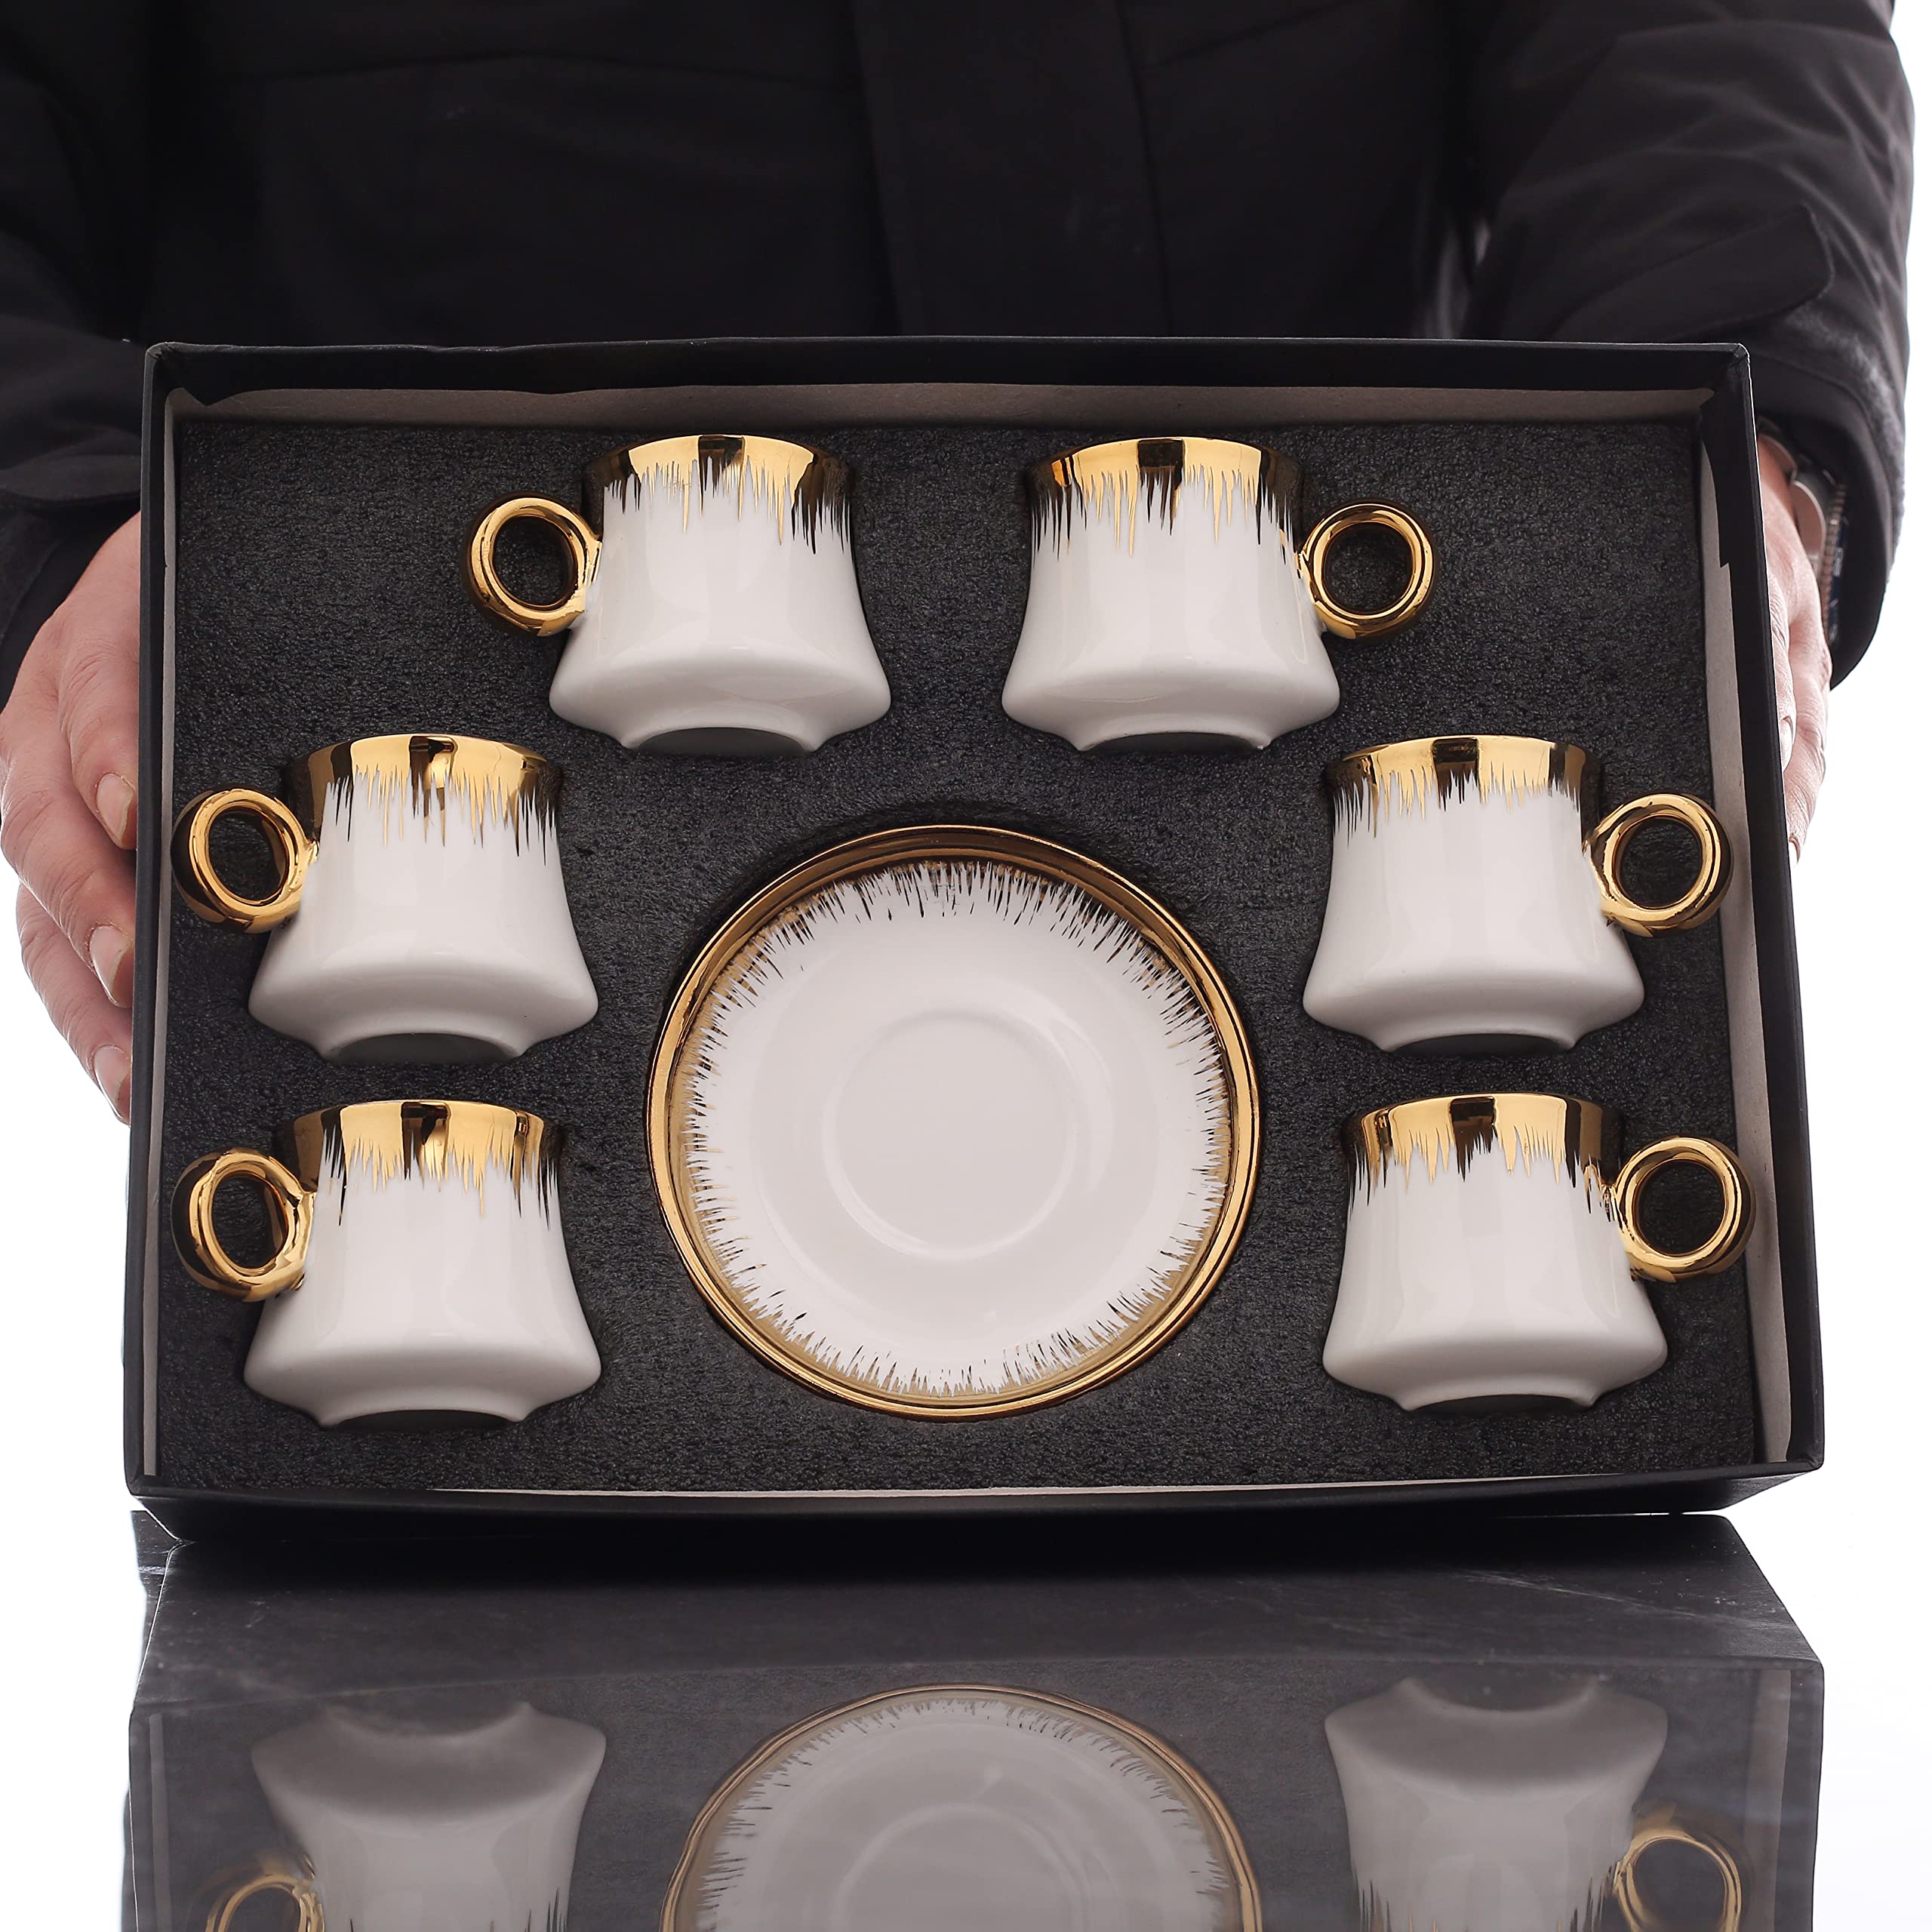 TGTAKDS Turkish Coffee Cup Set of 6 Demitasse Cups(3oz) with Golden Trim and Gift Box Espresso Cups with Saucer Sets for Festival Present